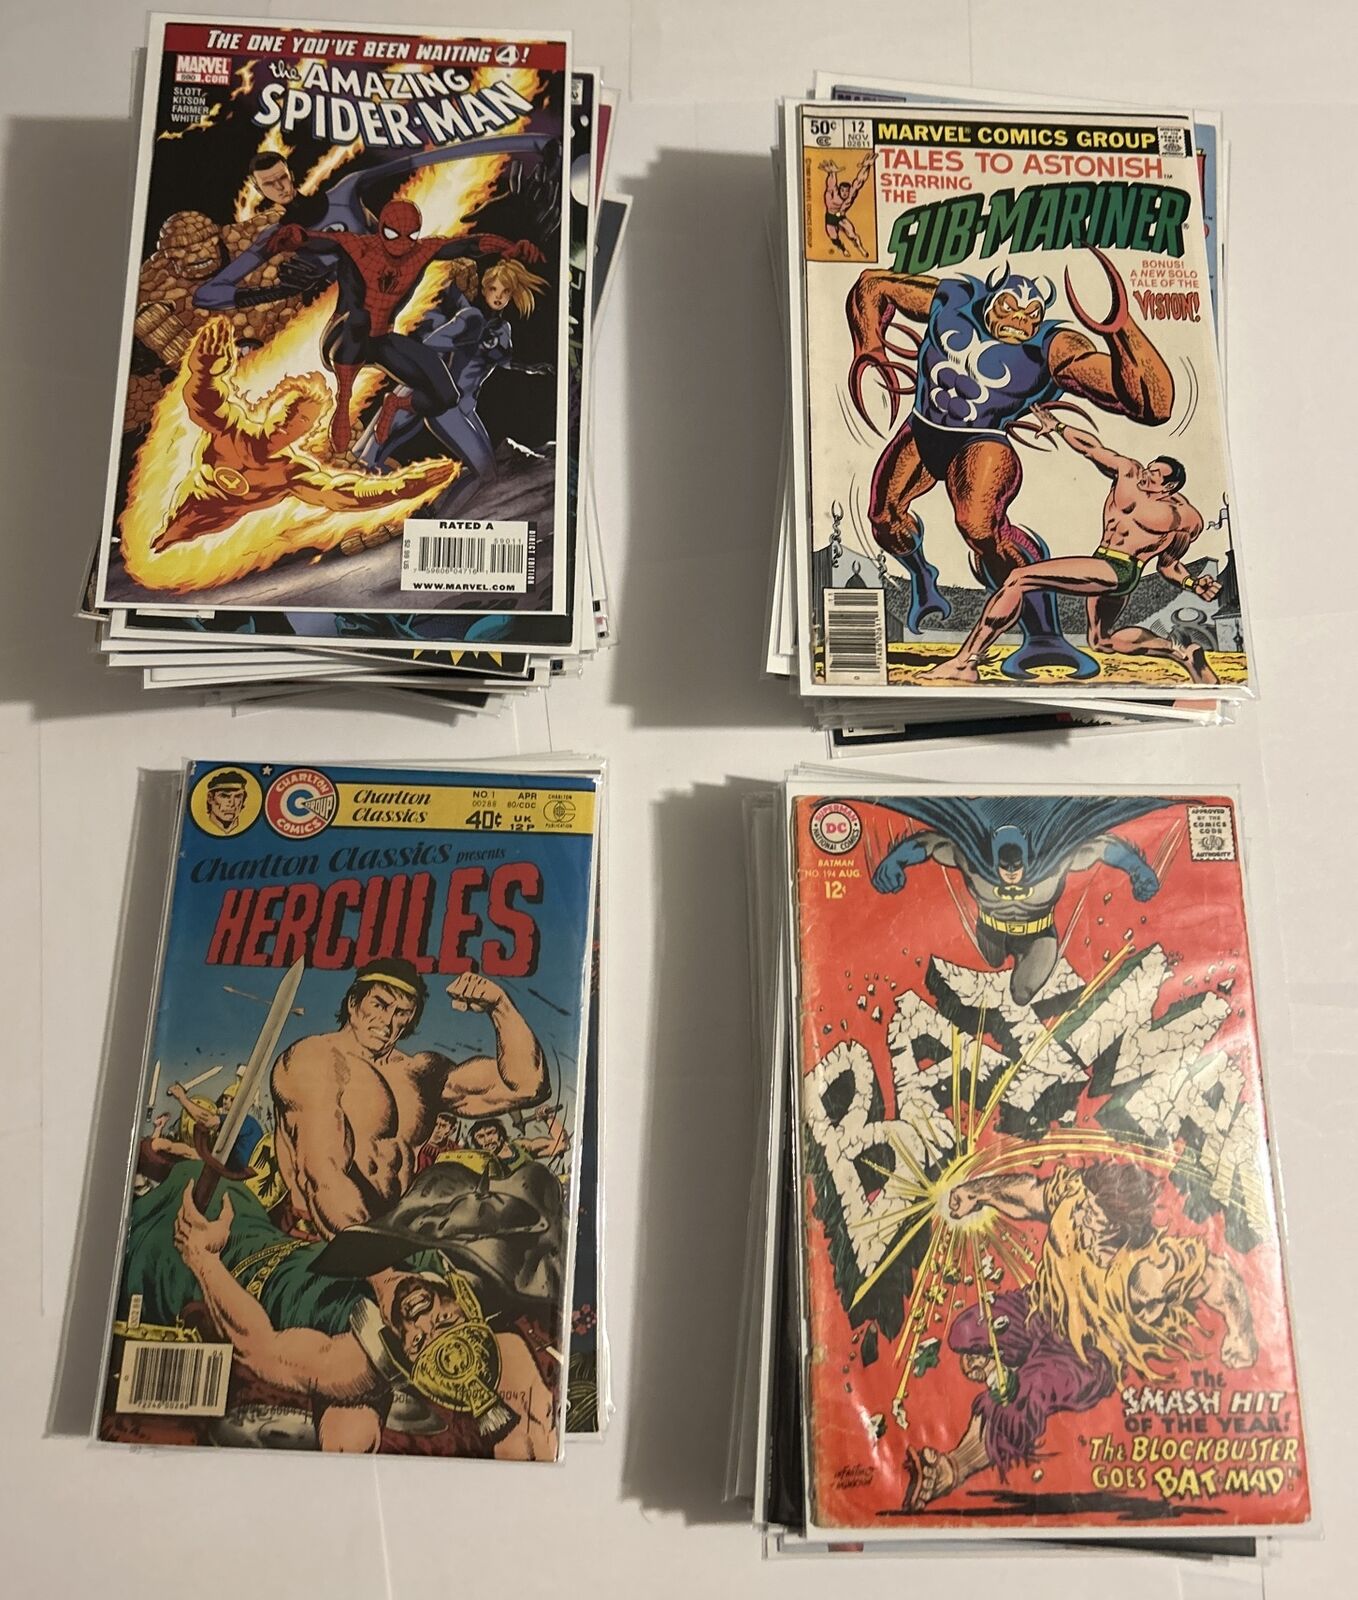 Mixed LOT OF 120 Marvel / DC & Indies Comics  Ranging From 60s to Early 2000s